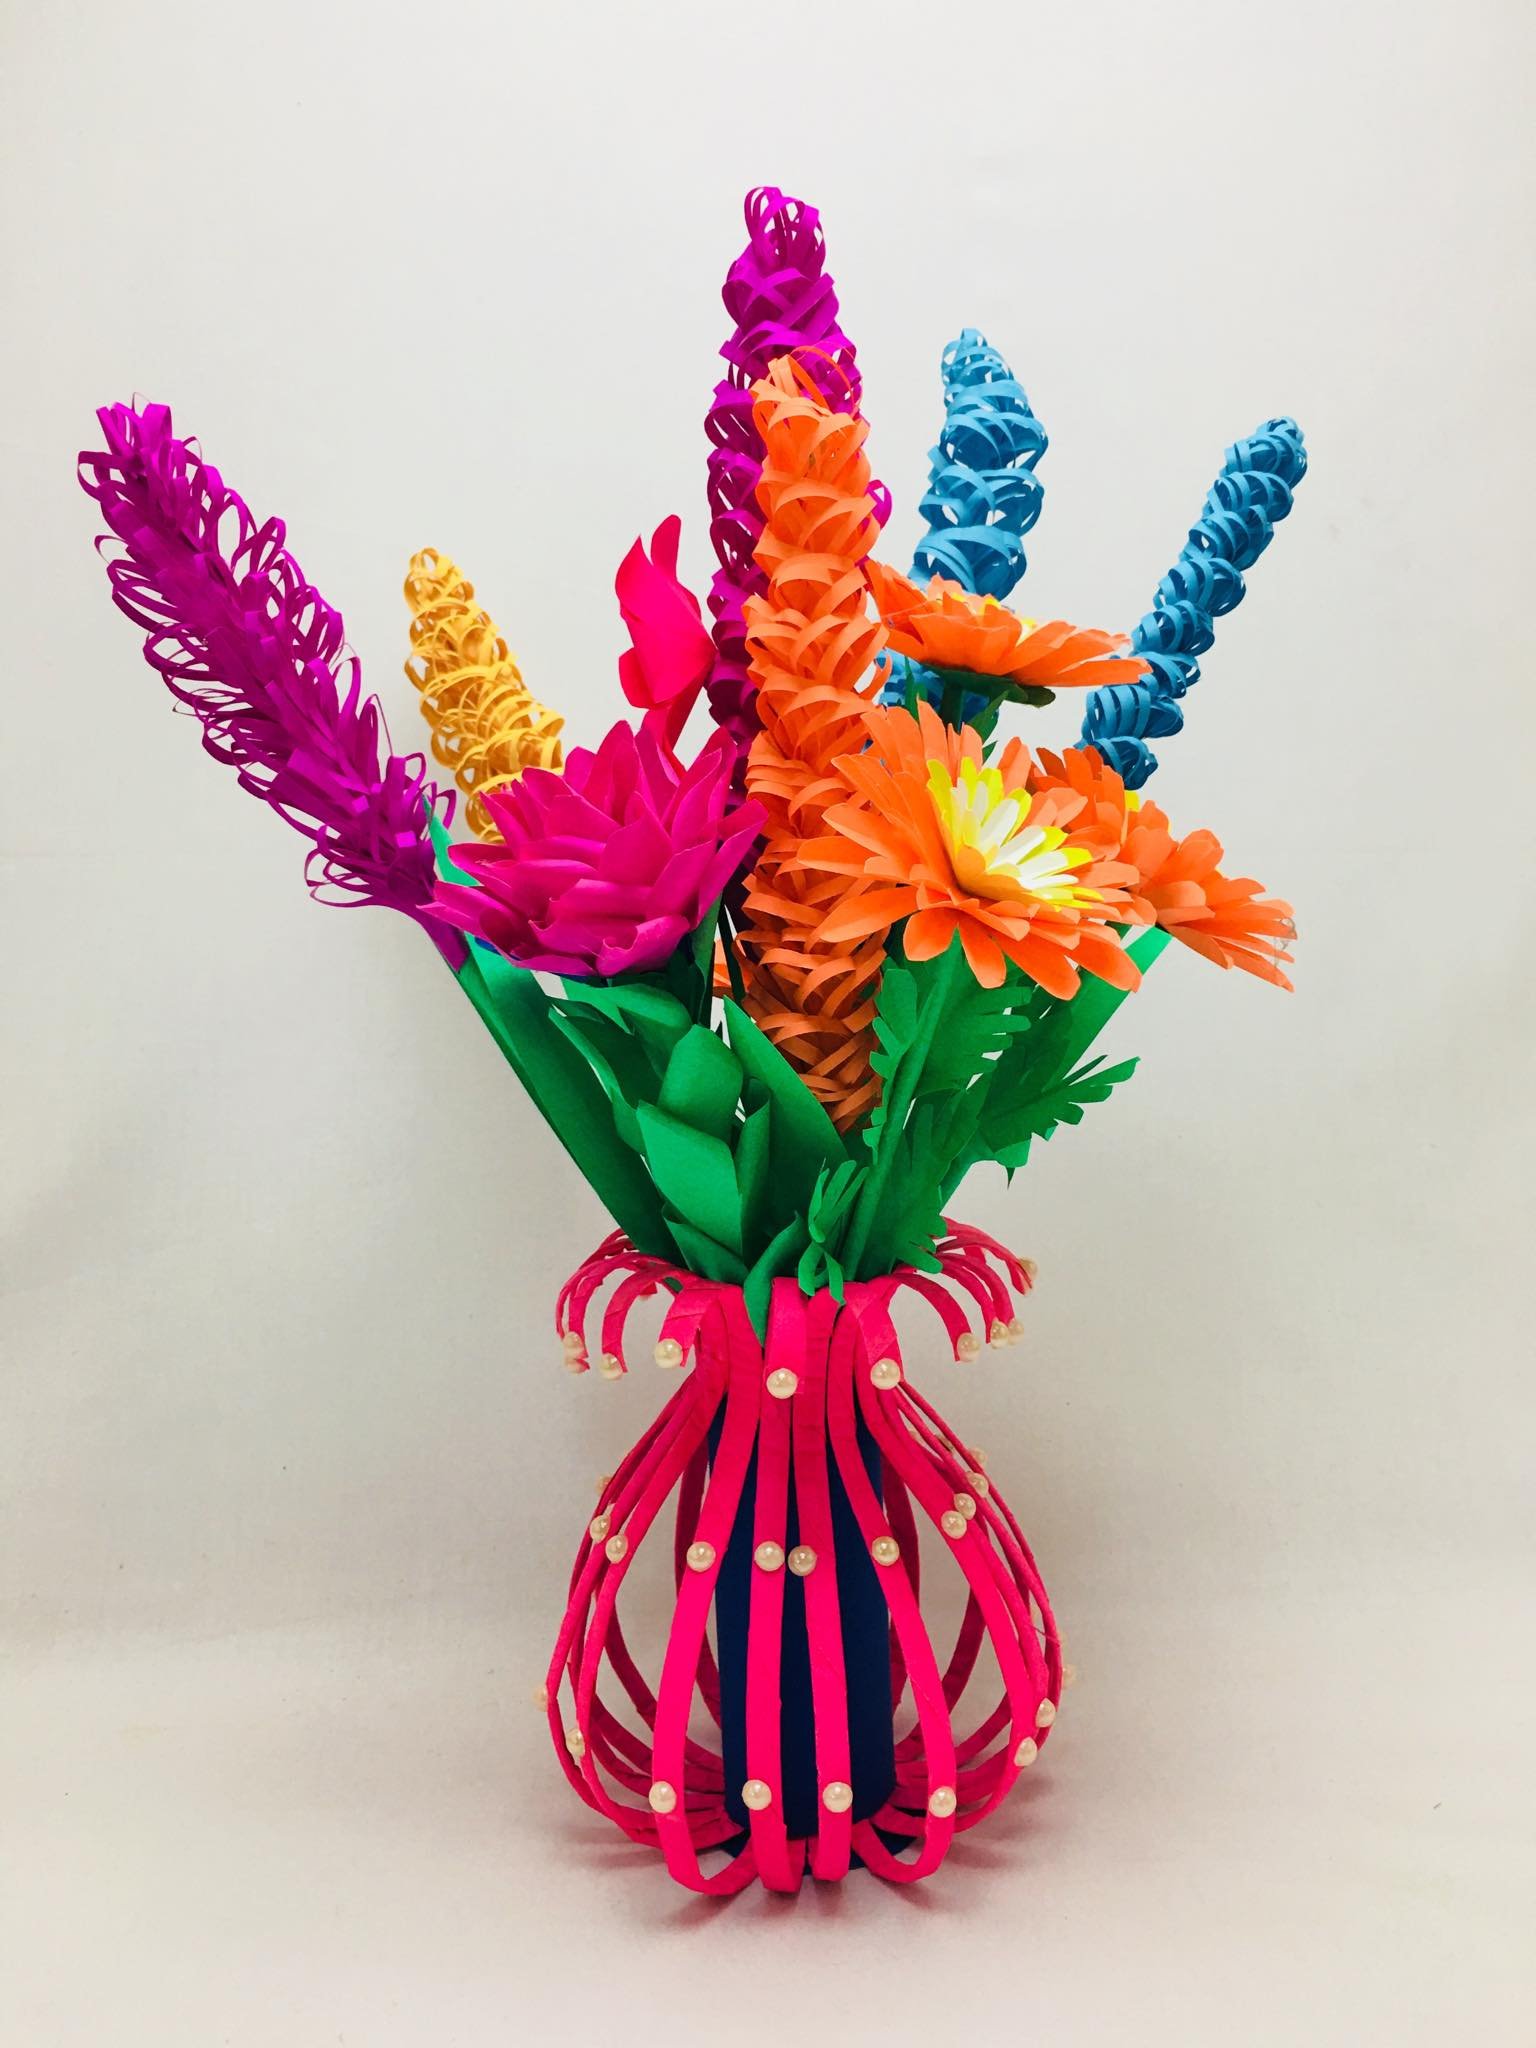 Make a flower vase with paper at home – Simple Craft Ideas